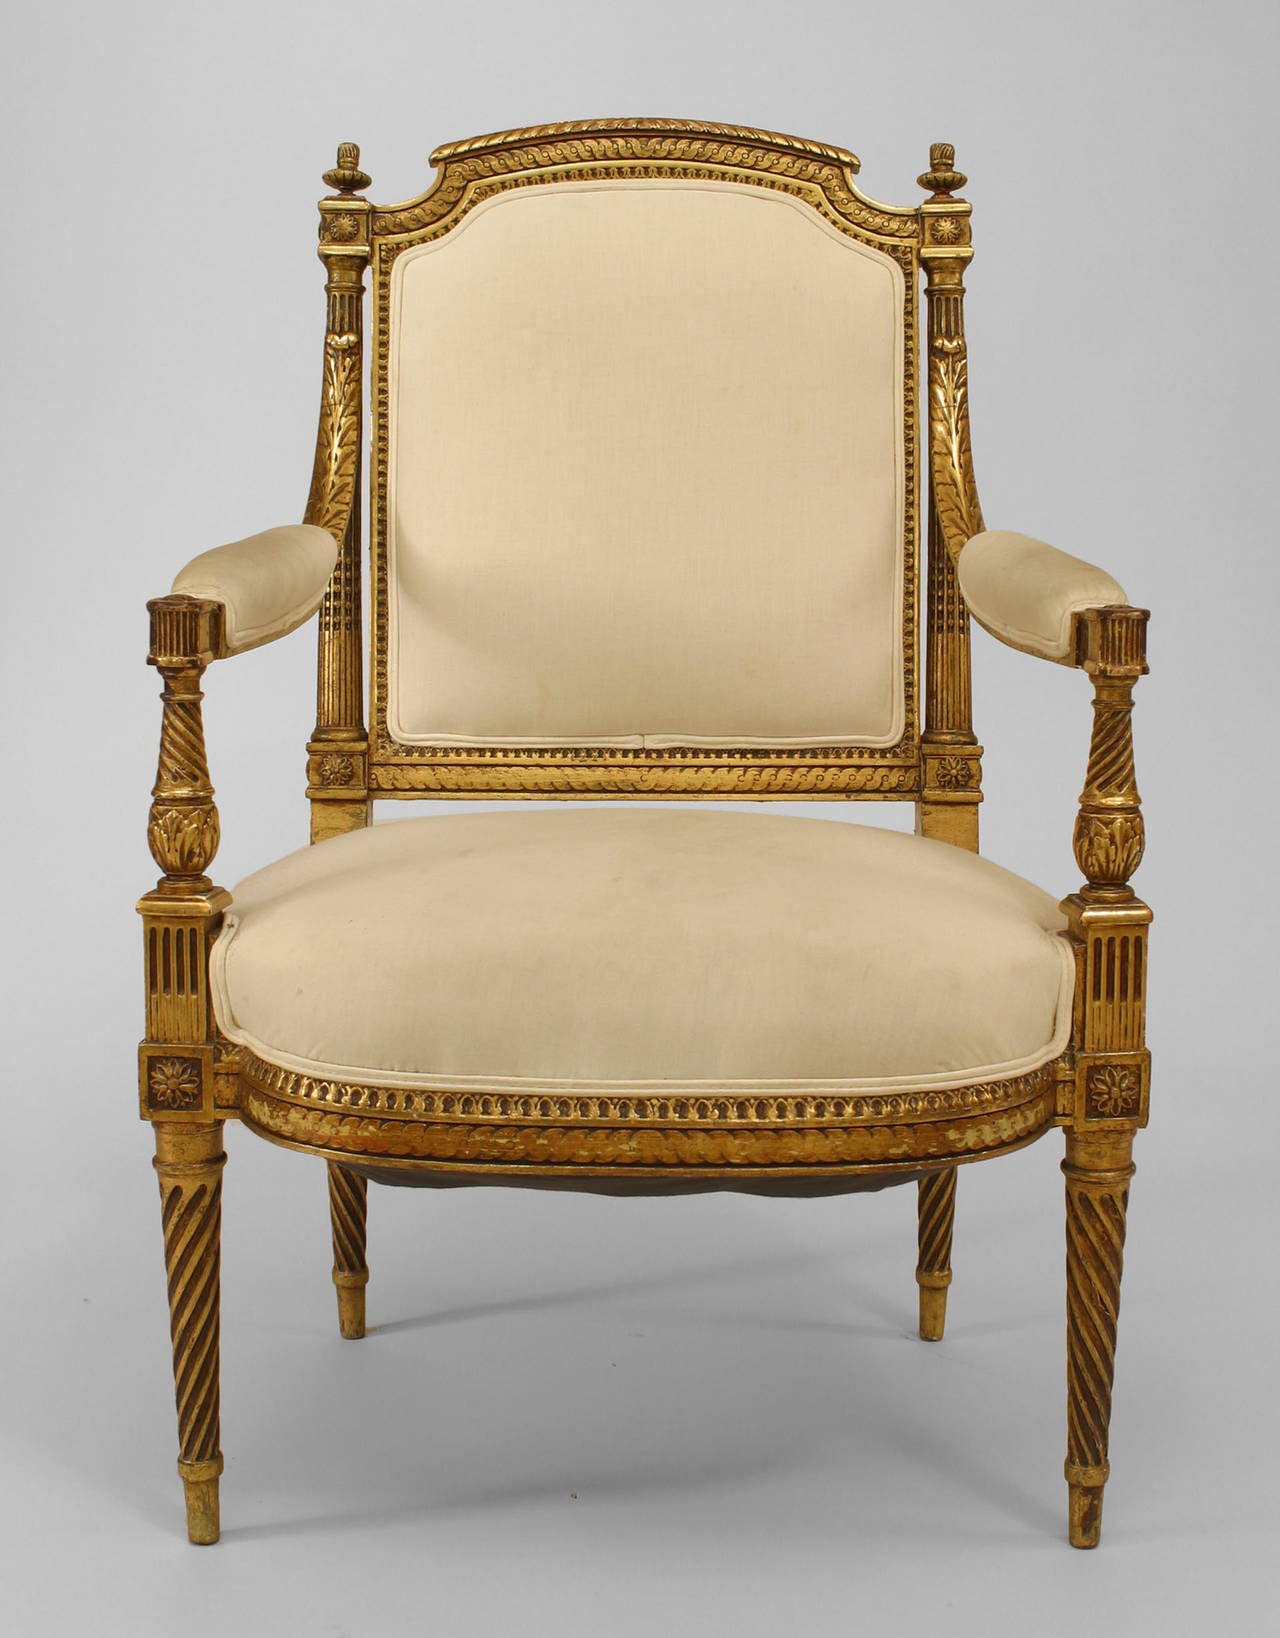 Pair of 19th century French Louis XVI style gilt carved open arm chairs with
upholstered seats and backs and carved swirl design legs.